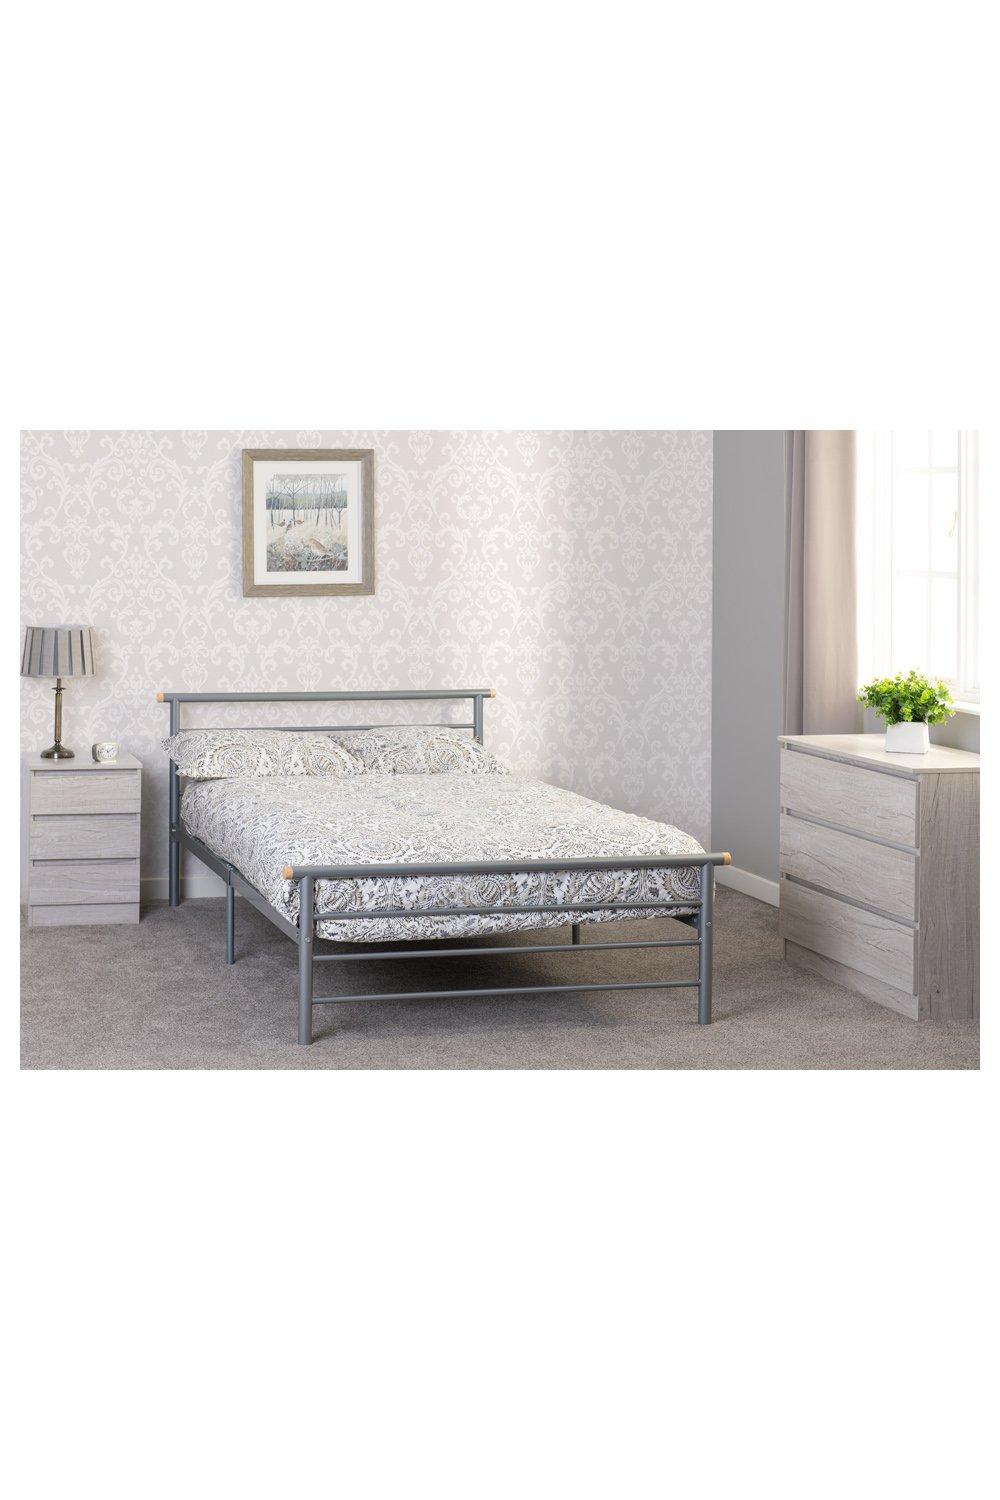 Orion 4' Small Double Bed